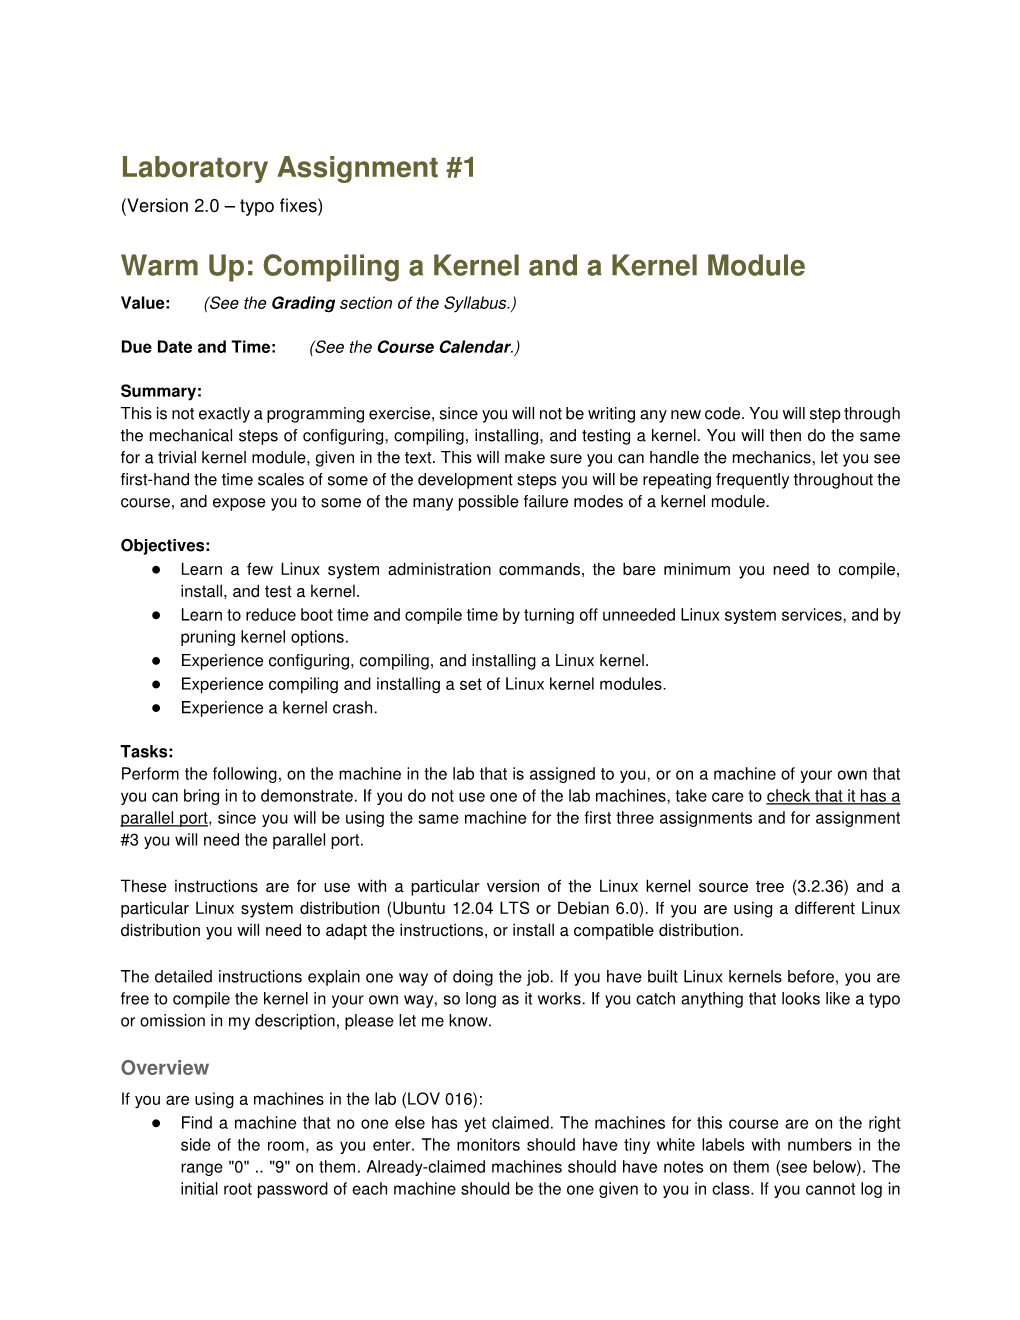 Laboratory Assignment #1 Warm Up: Compiling a Kernel and a Kernel Module